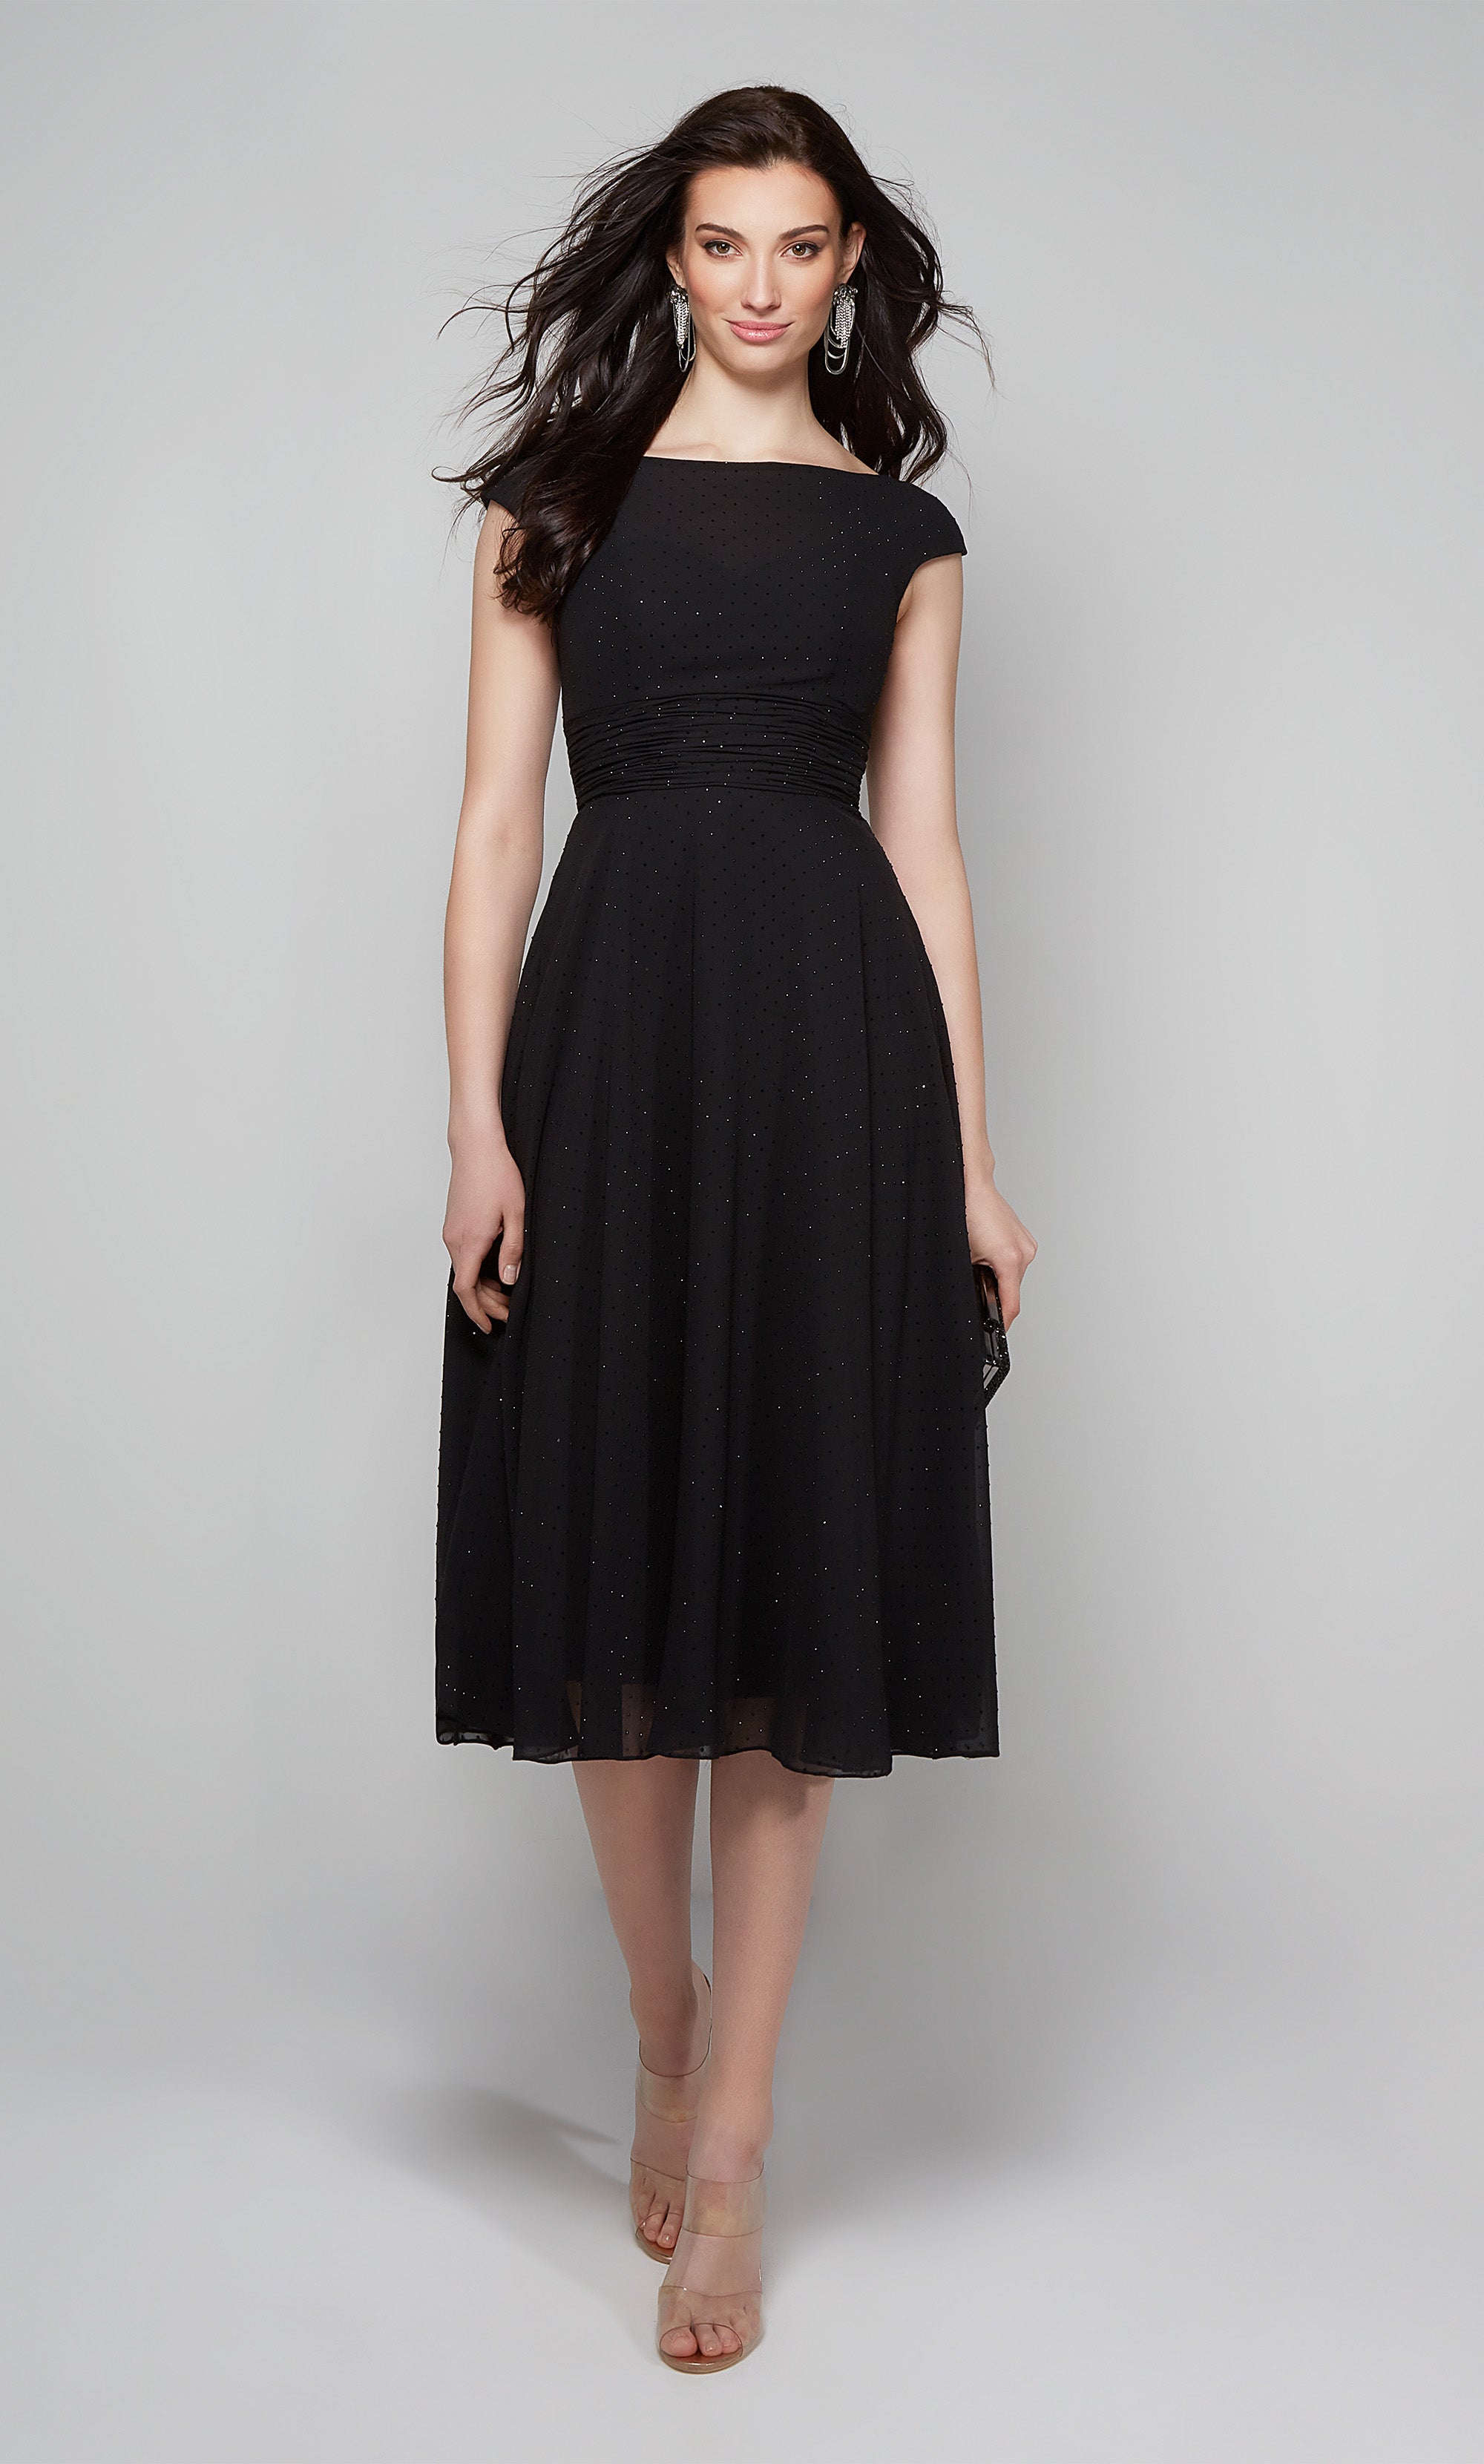 Simple black cocktail dress with rhinestones and simple mid-long sleeves